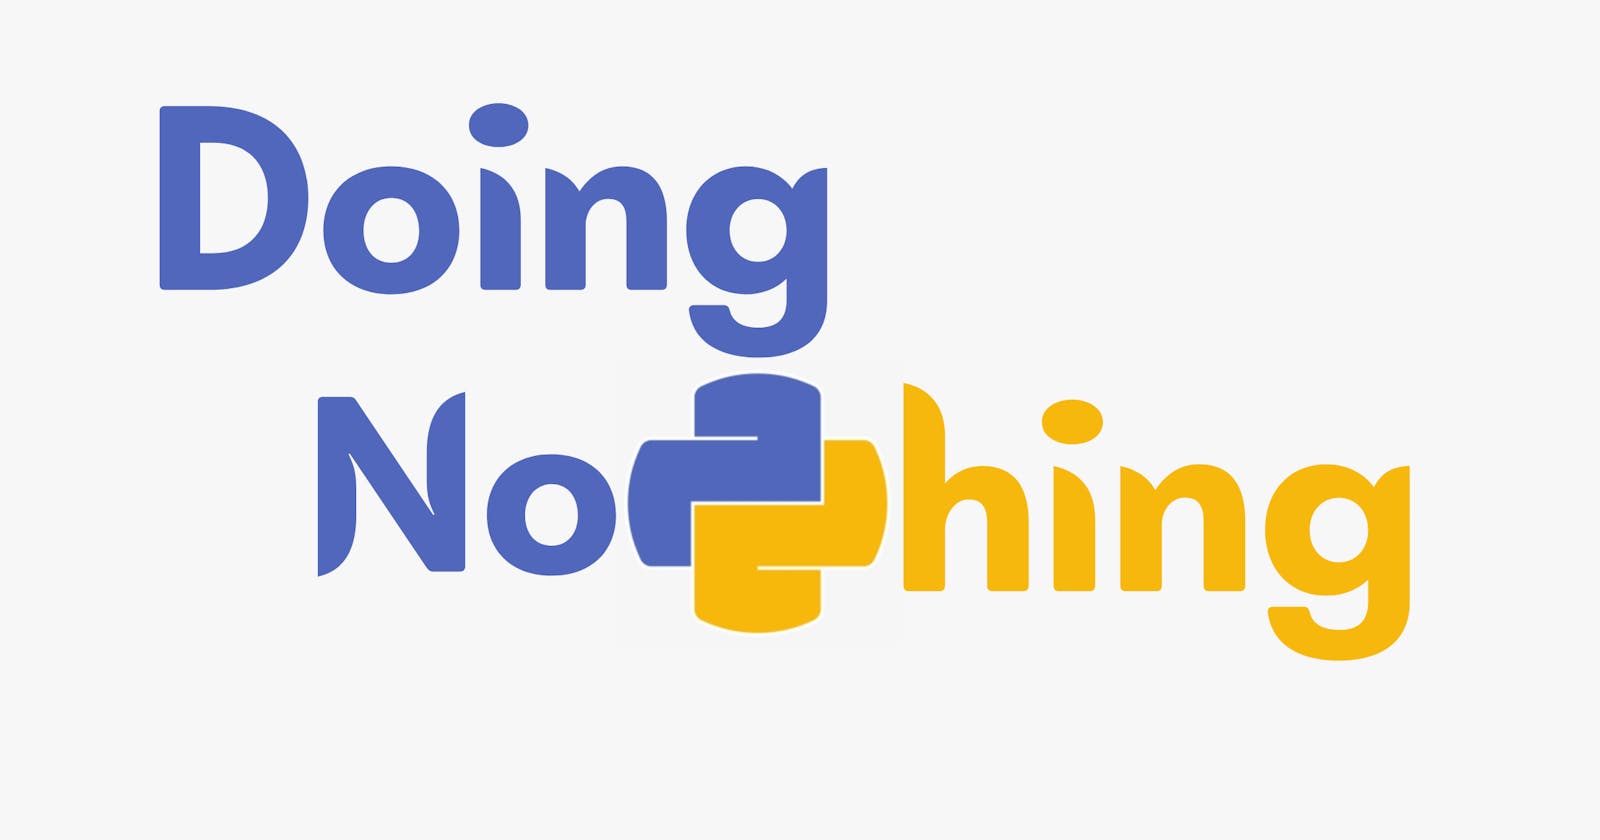 The Art of doing nothing: Python Edition